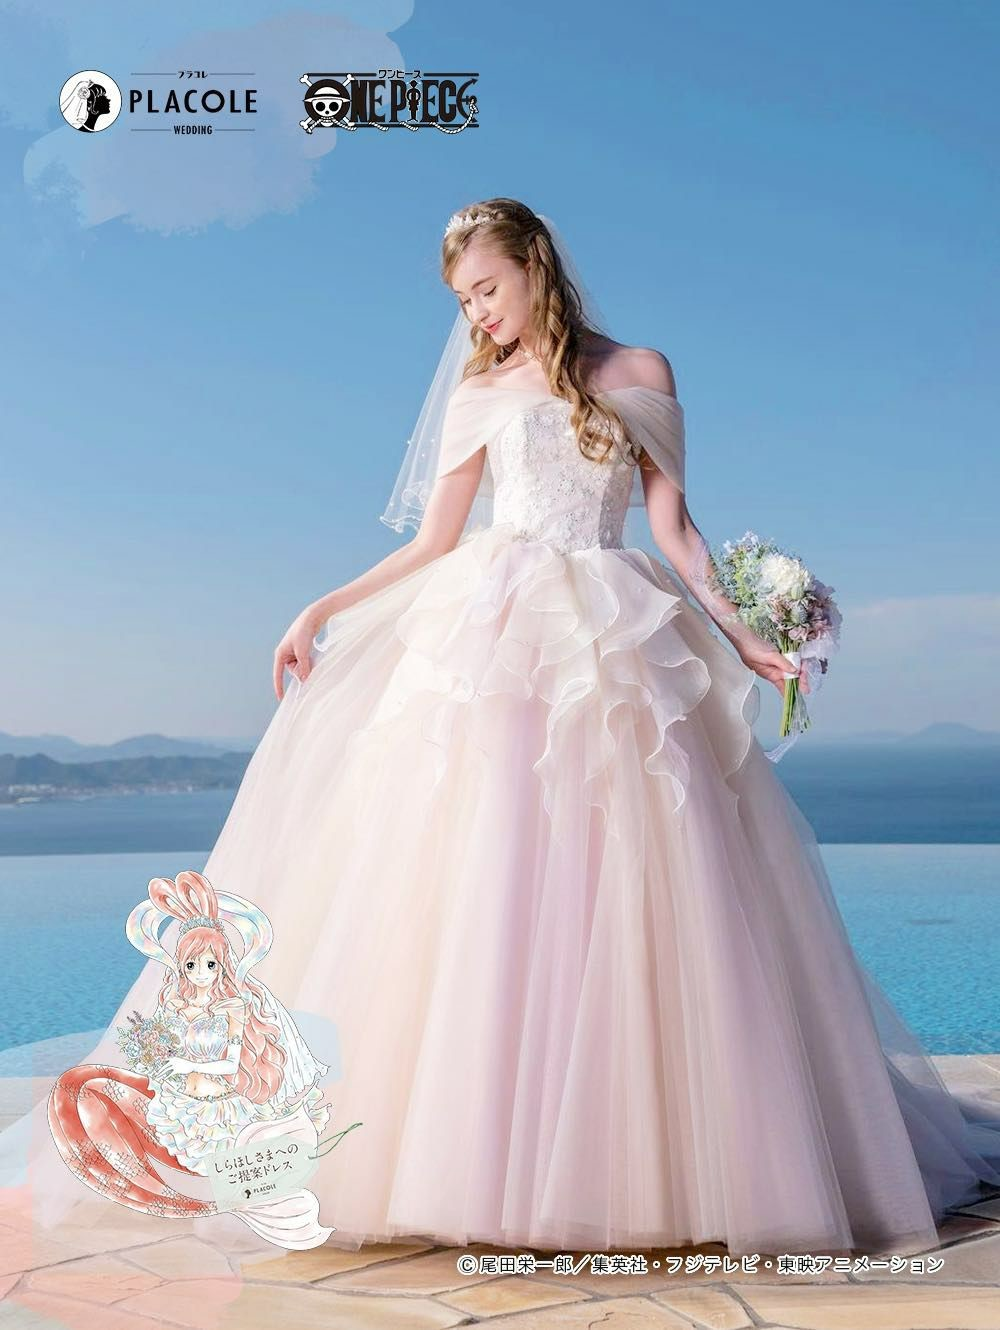 Sailor Moon Princess Serenity Inspired Wedding Gown | Our customer Amy  commissioned us to design & create her Princess Serenity Inspired Bridal  Gown for her Wedding Day. Before we added any of